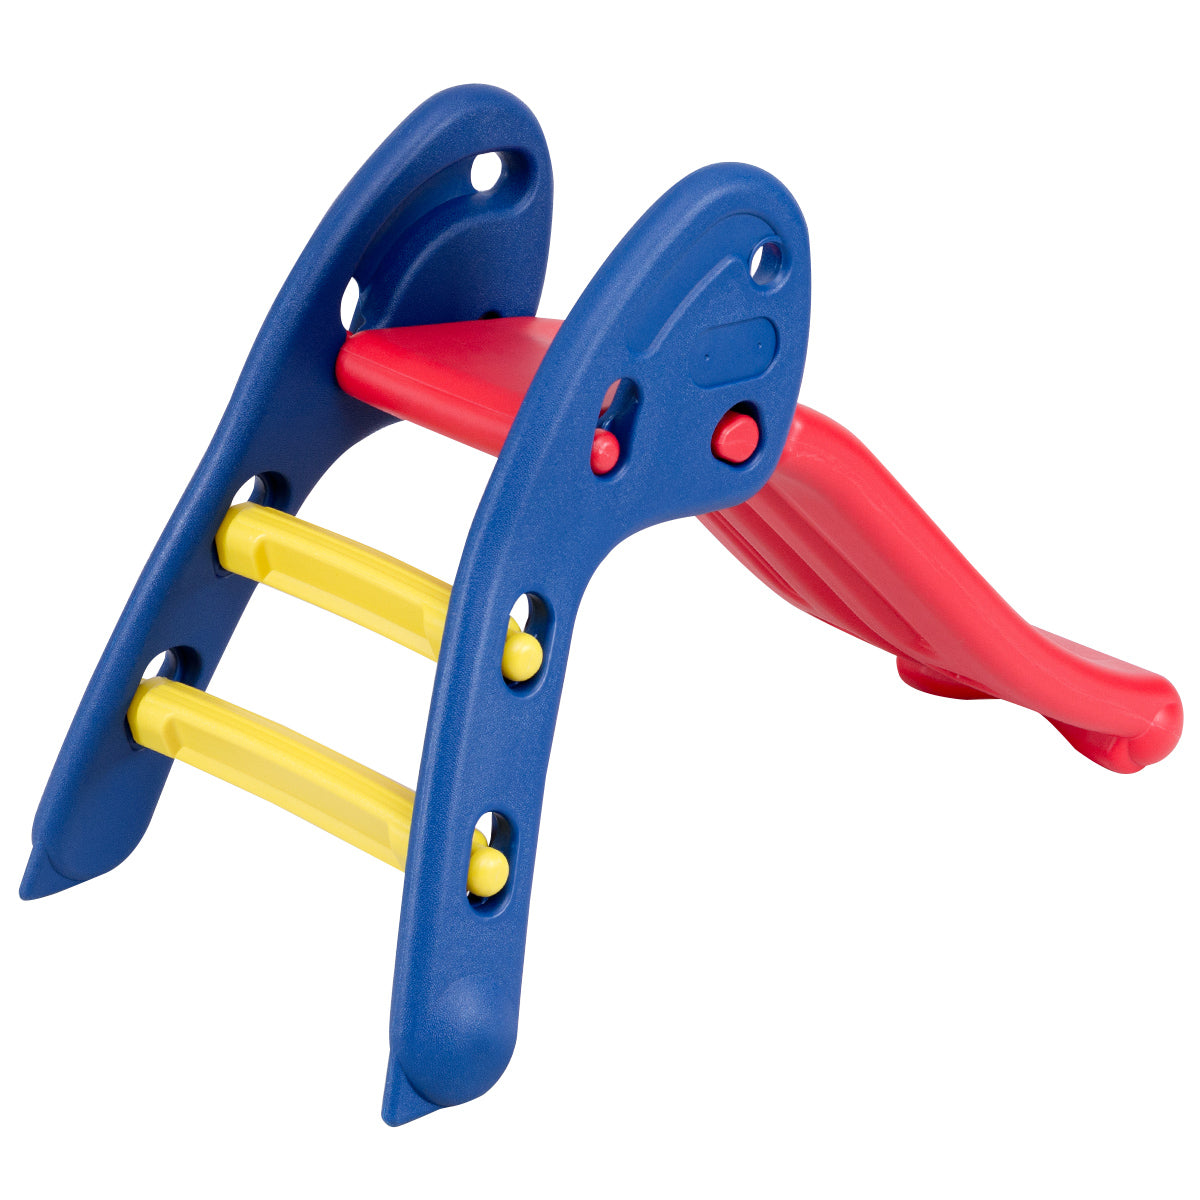 Folding Plastic Slide for Indoor and Outdoor Use